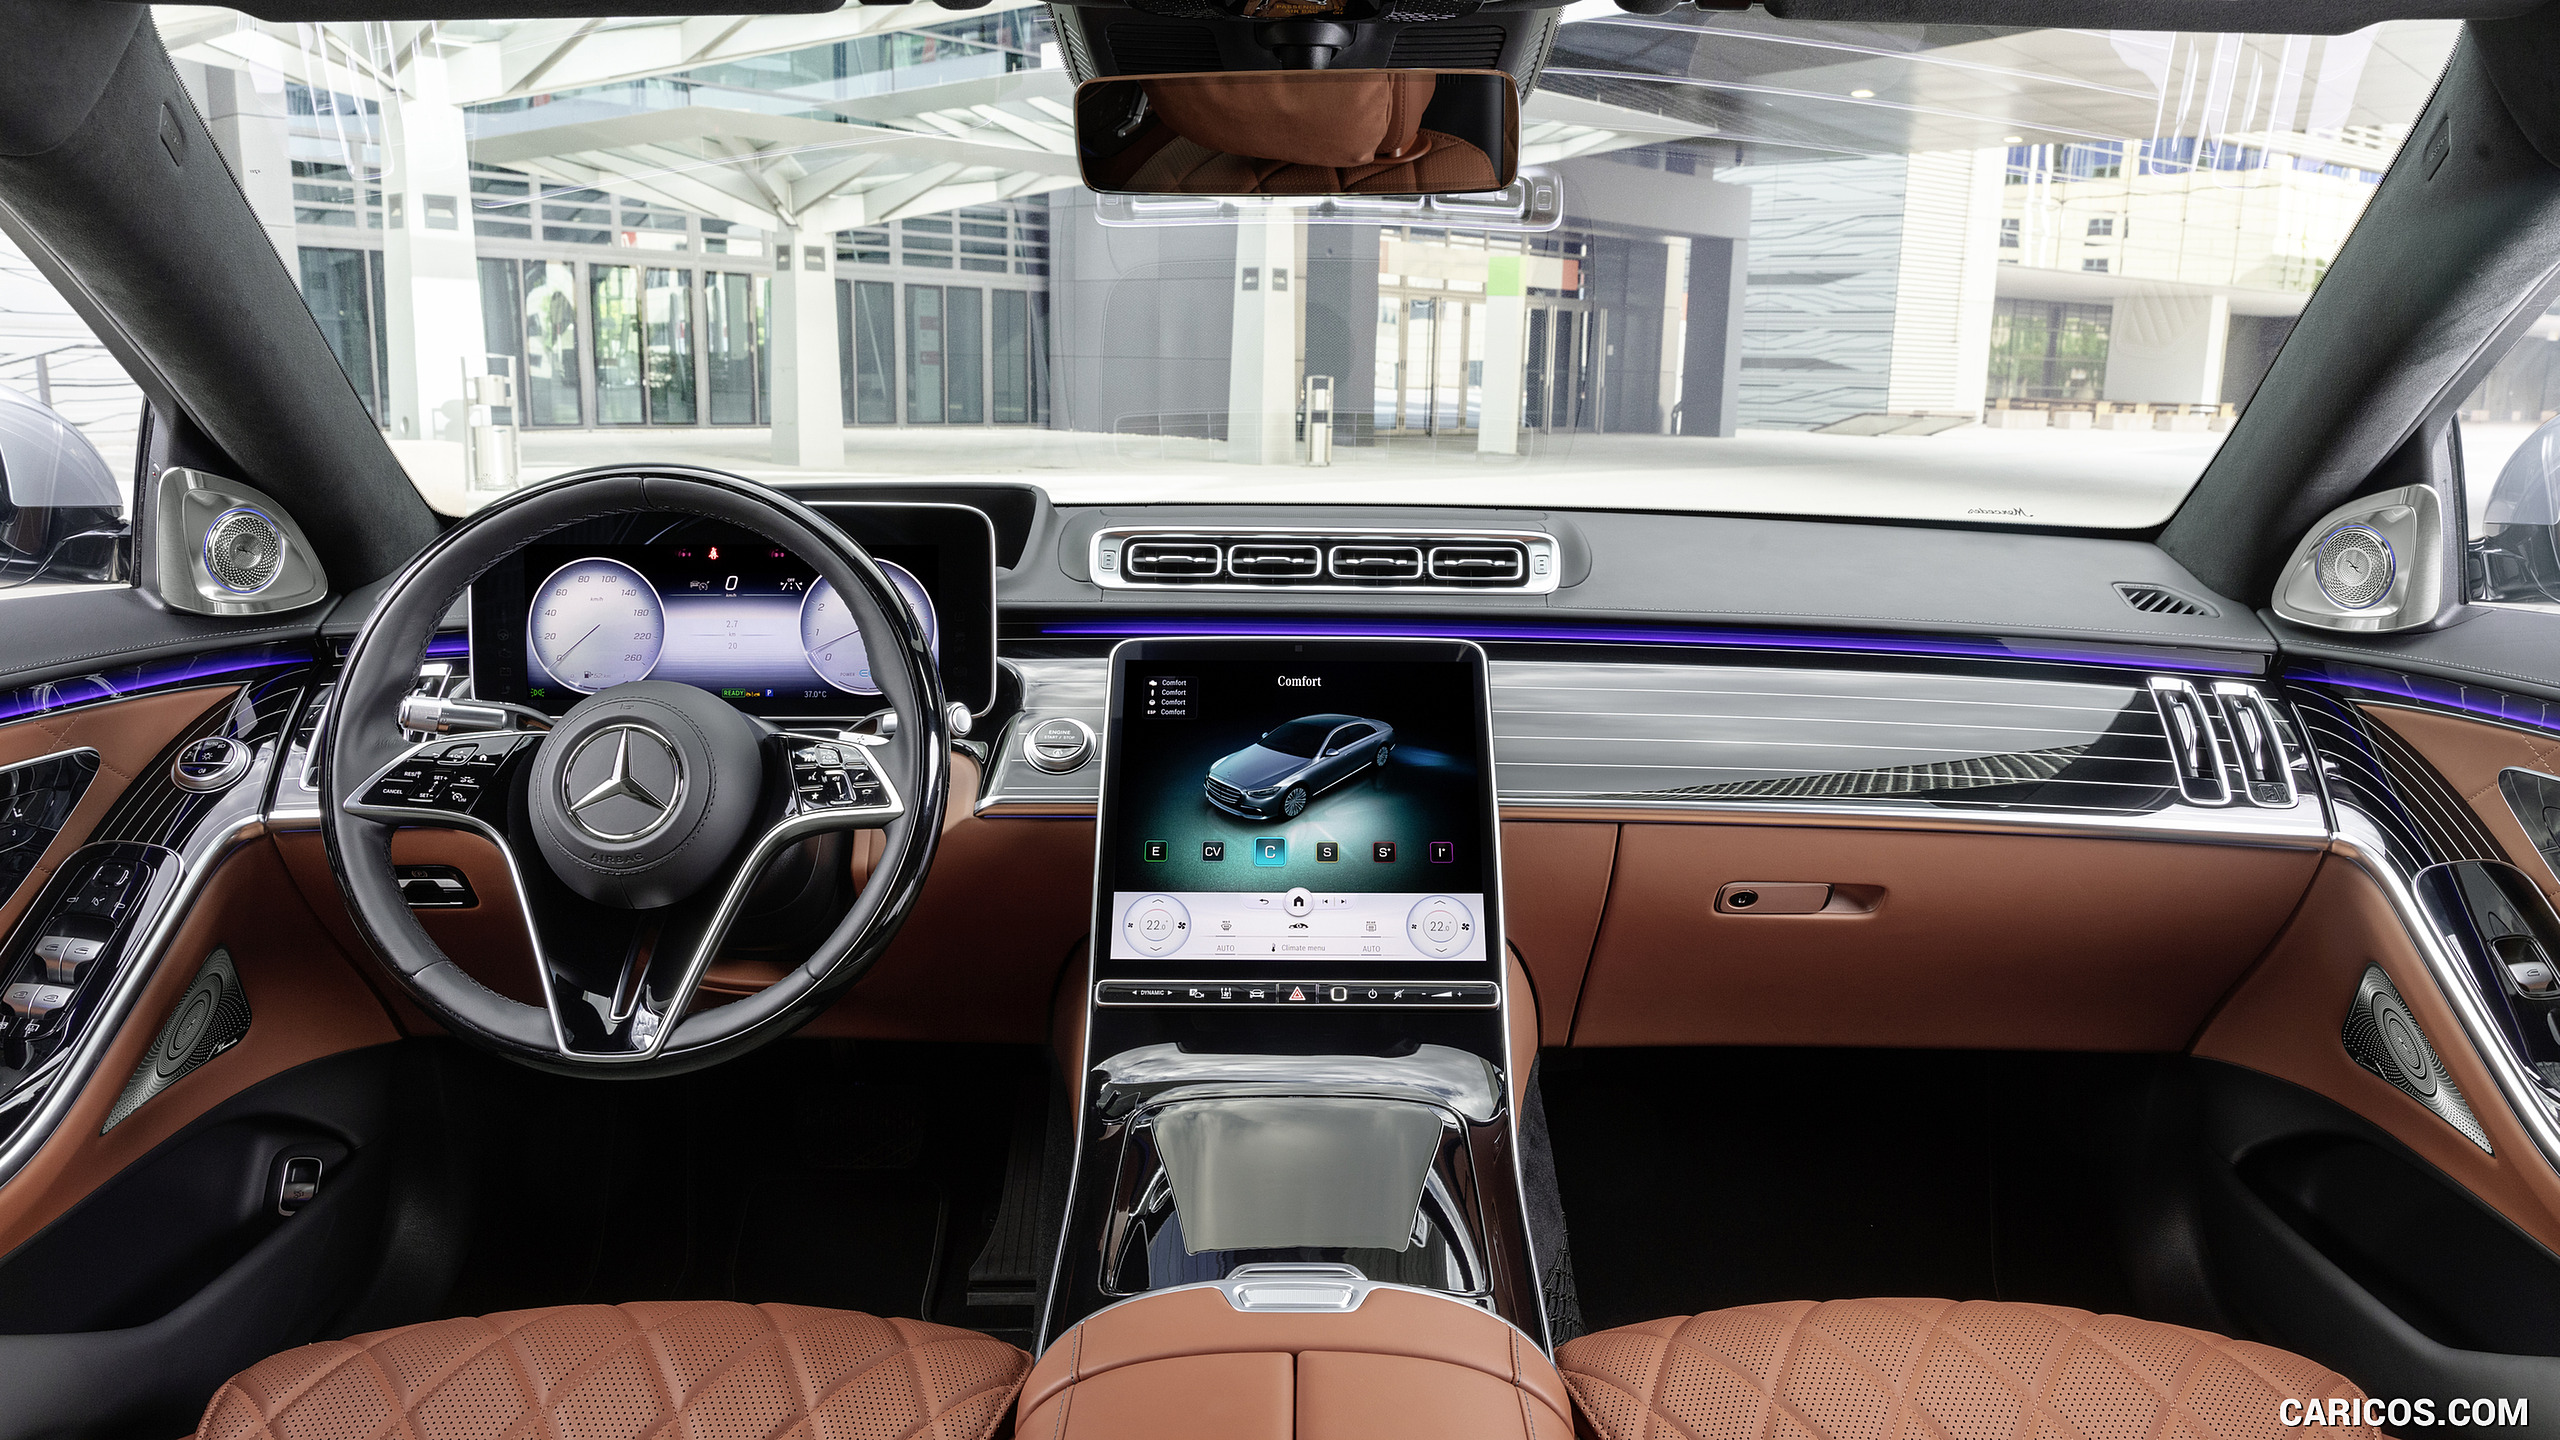 2021 Mercedes-Benz S-Class (Color: Leather Siena Brown) - Interior, Cockpit, #115 of 316